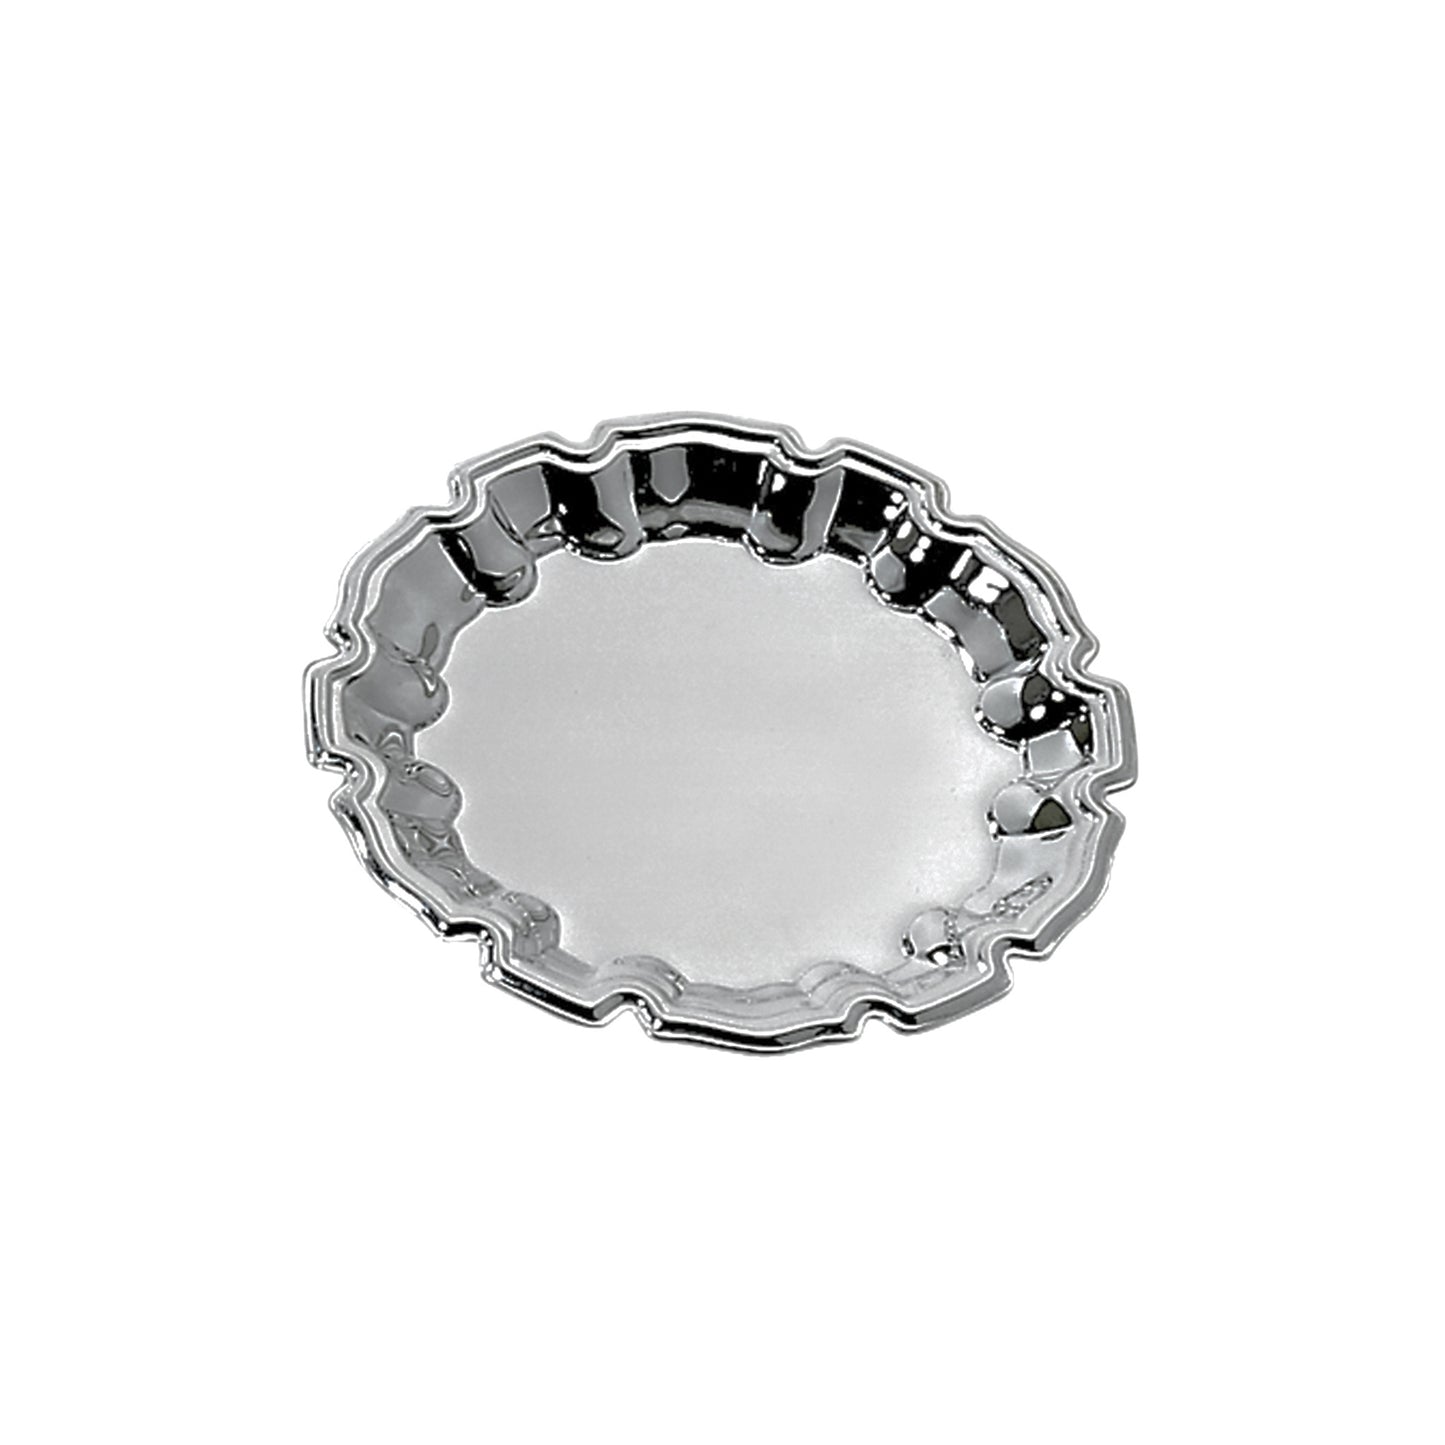 Chippendale Style Tray - 8.5"